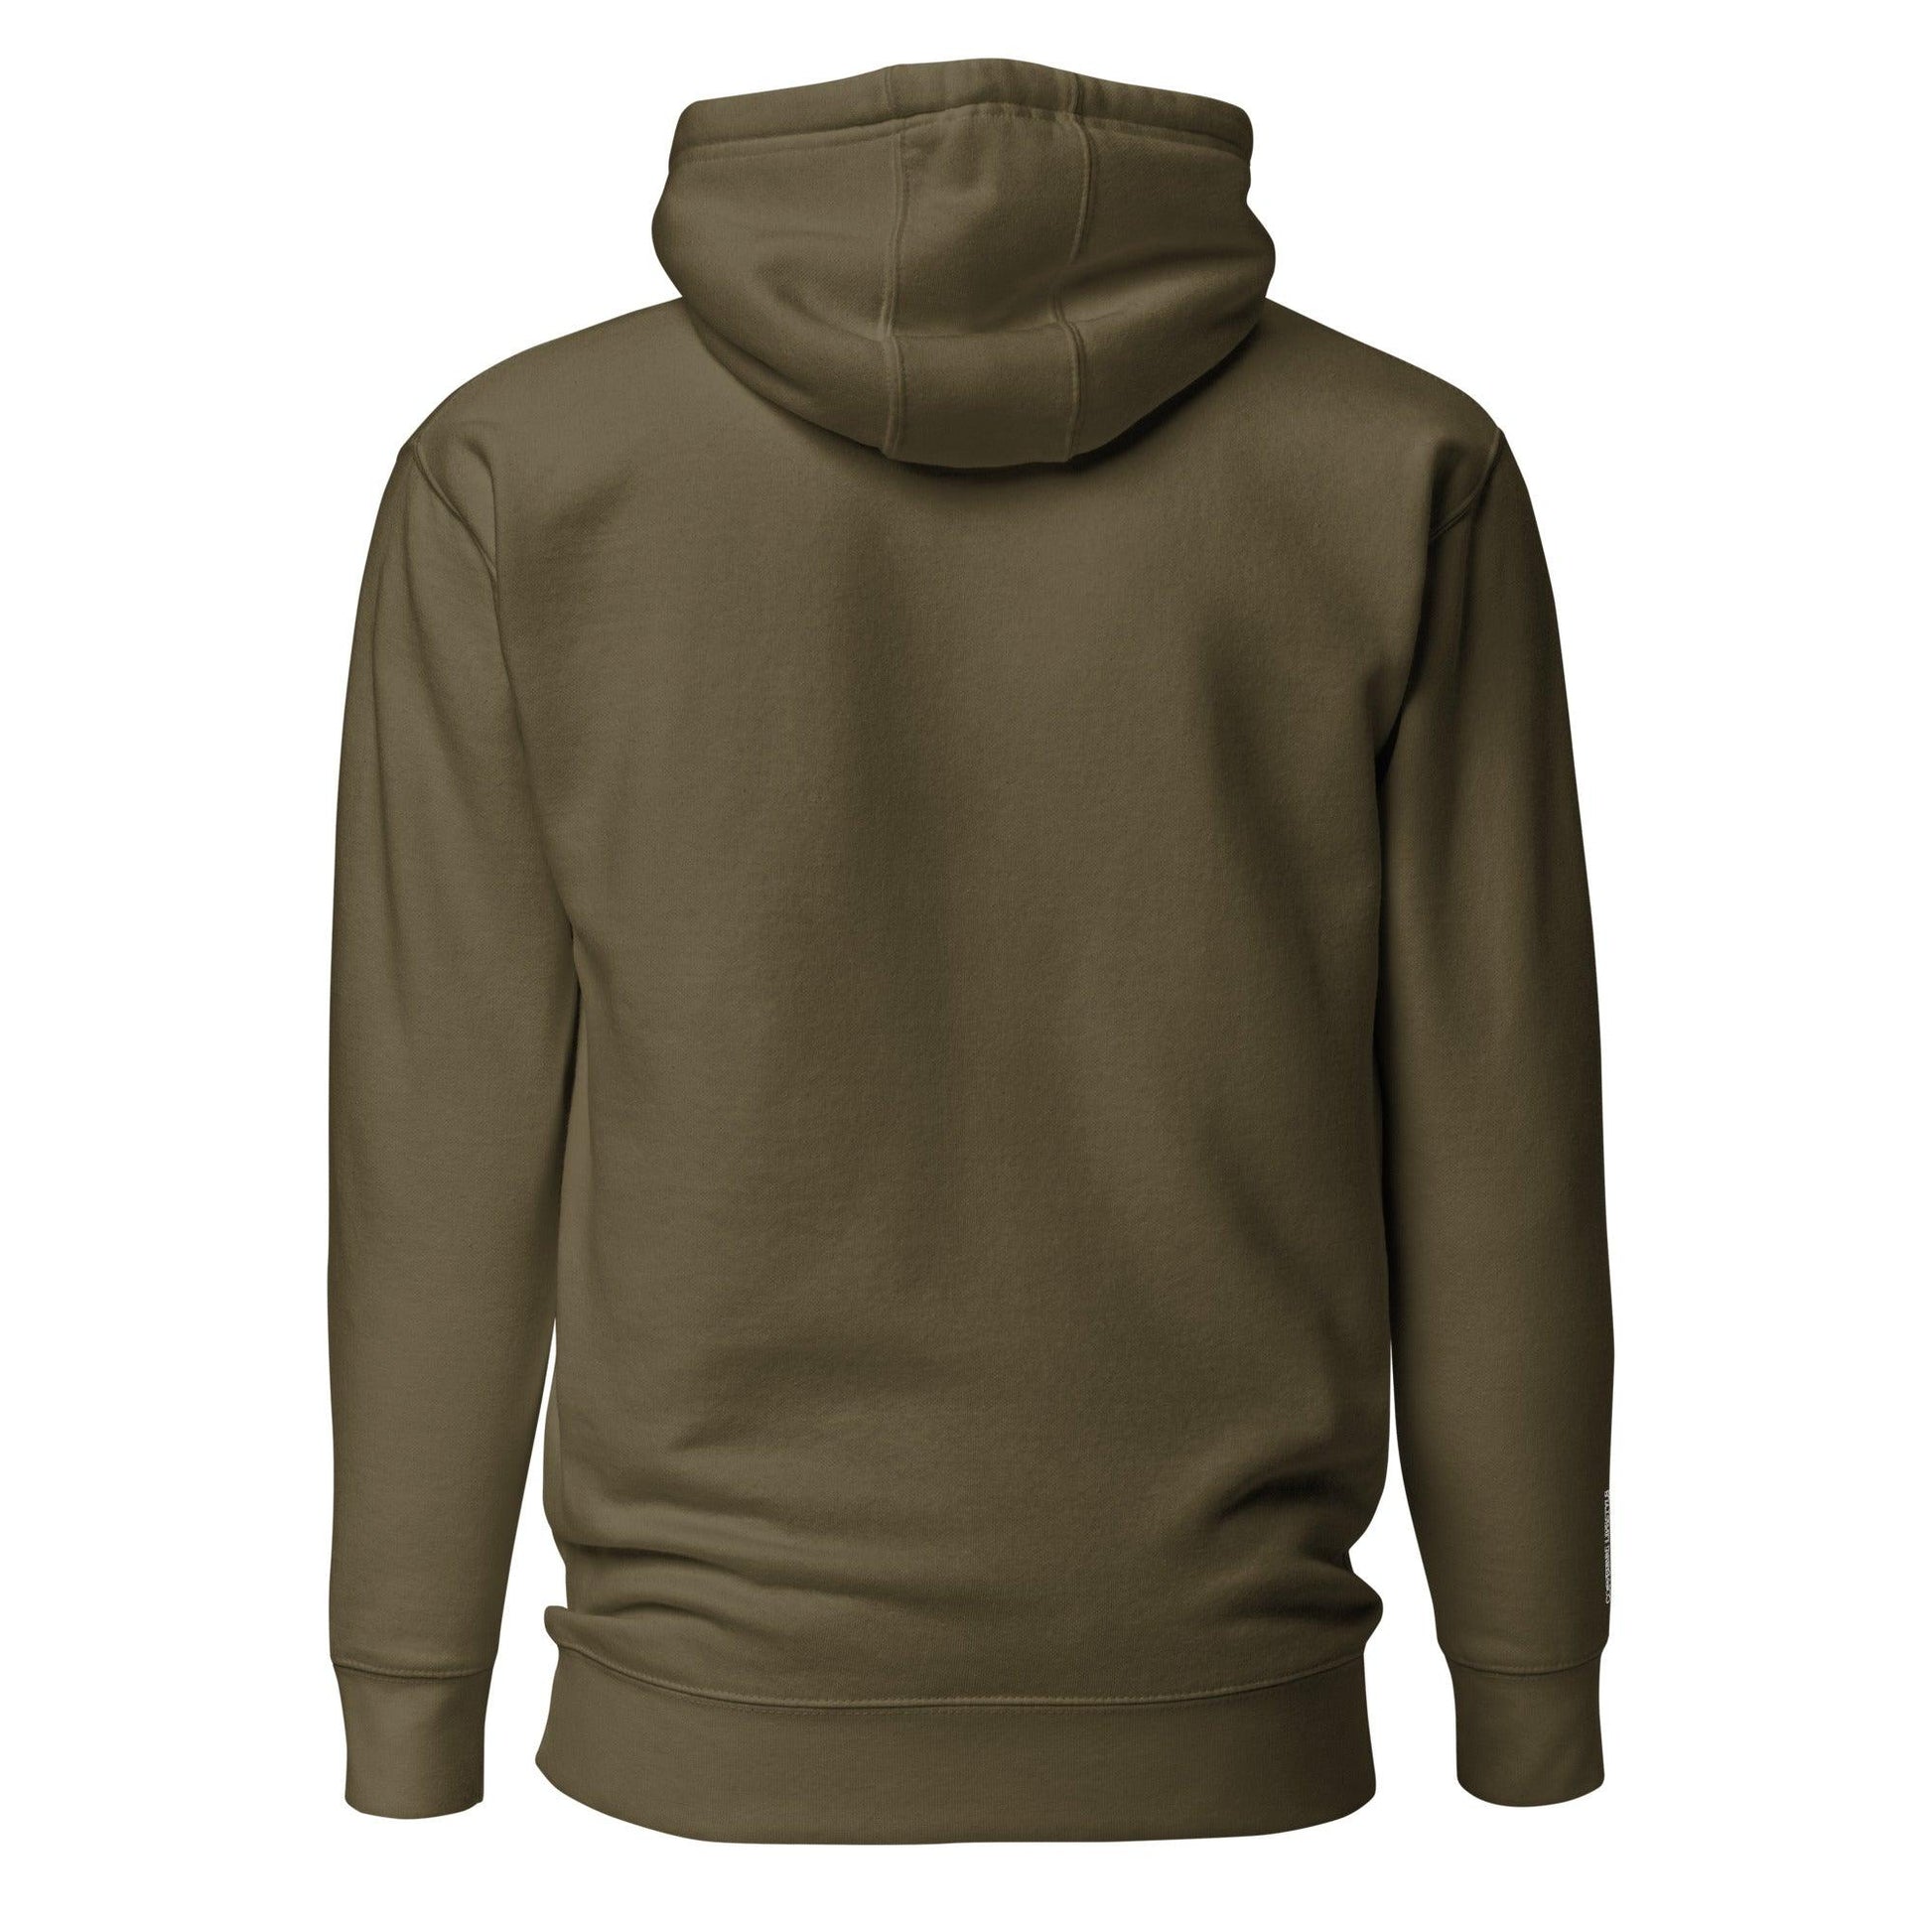 Embroidery Unisex Athletic Hoodie - COFFEEBRE